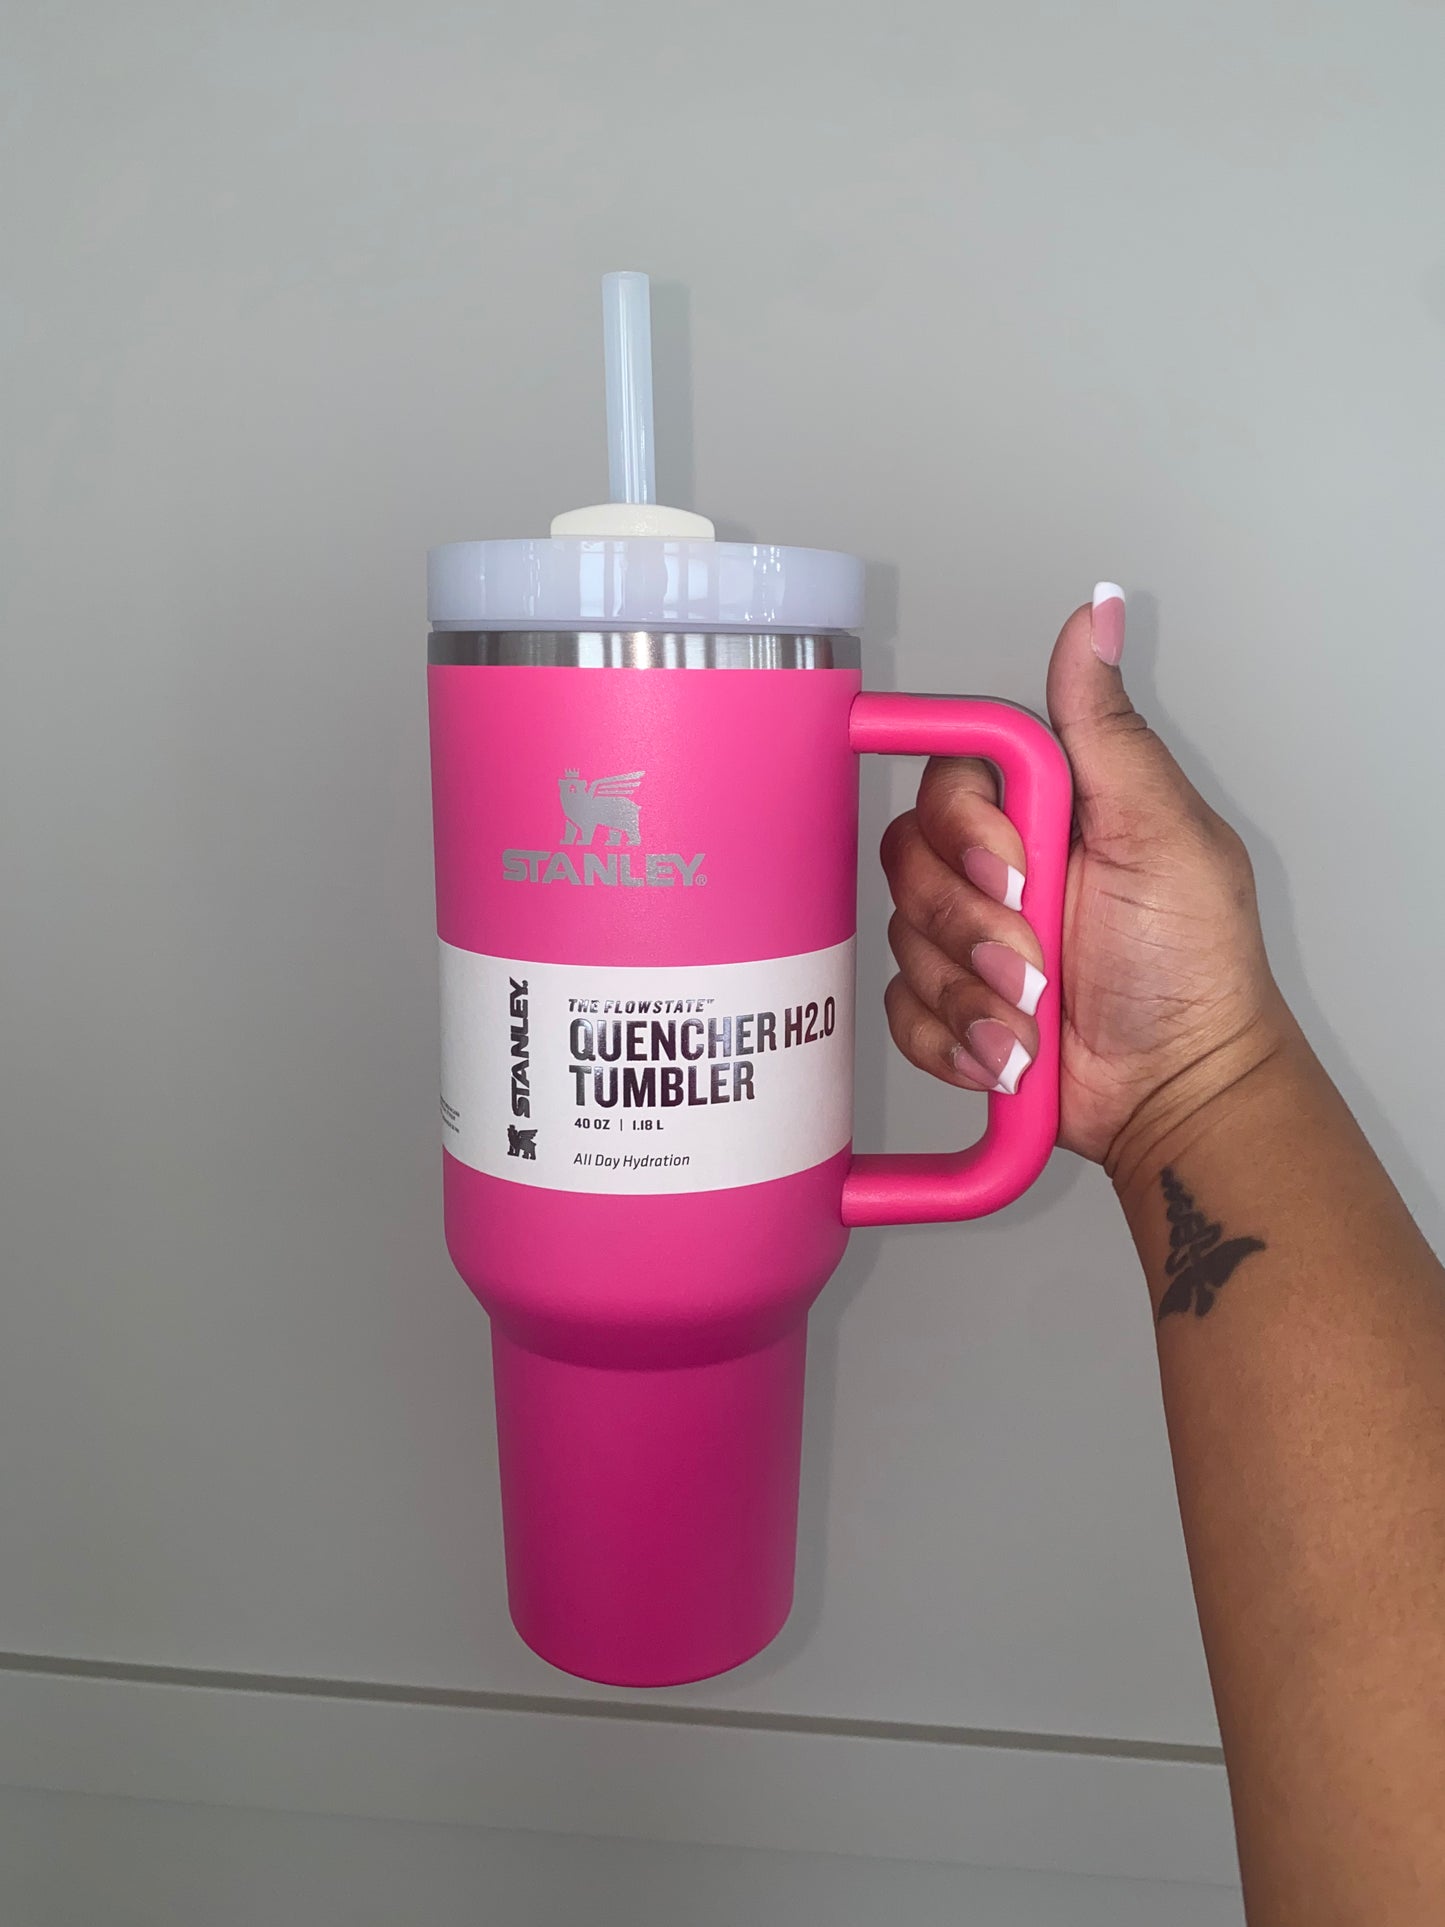 Stanley Quencher Tumbler Cup 40oz.